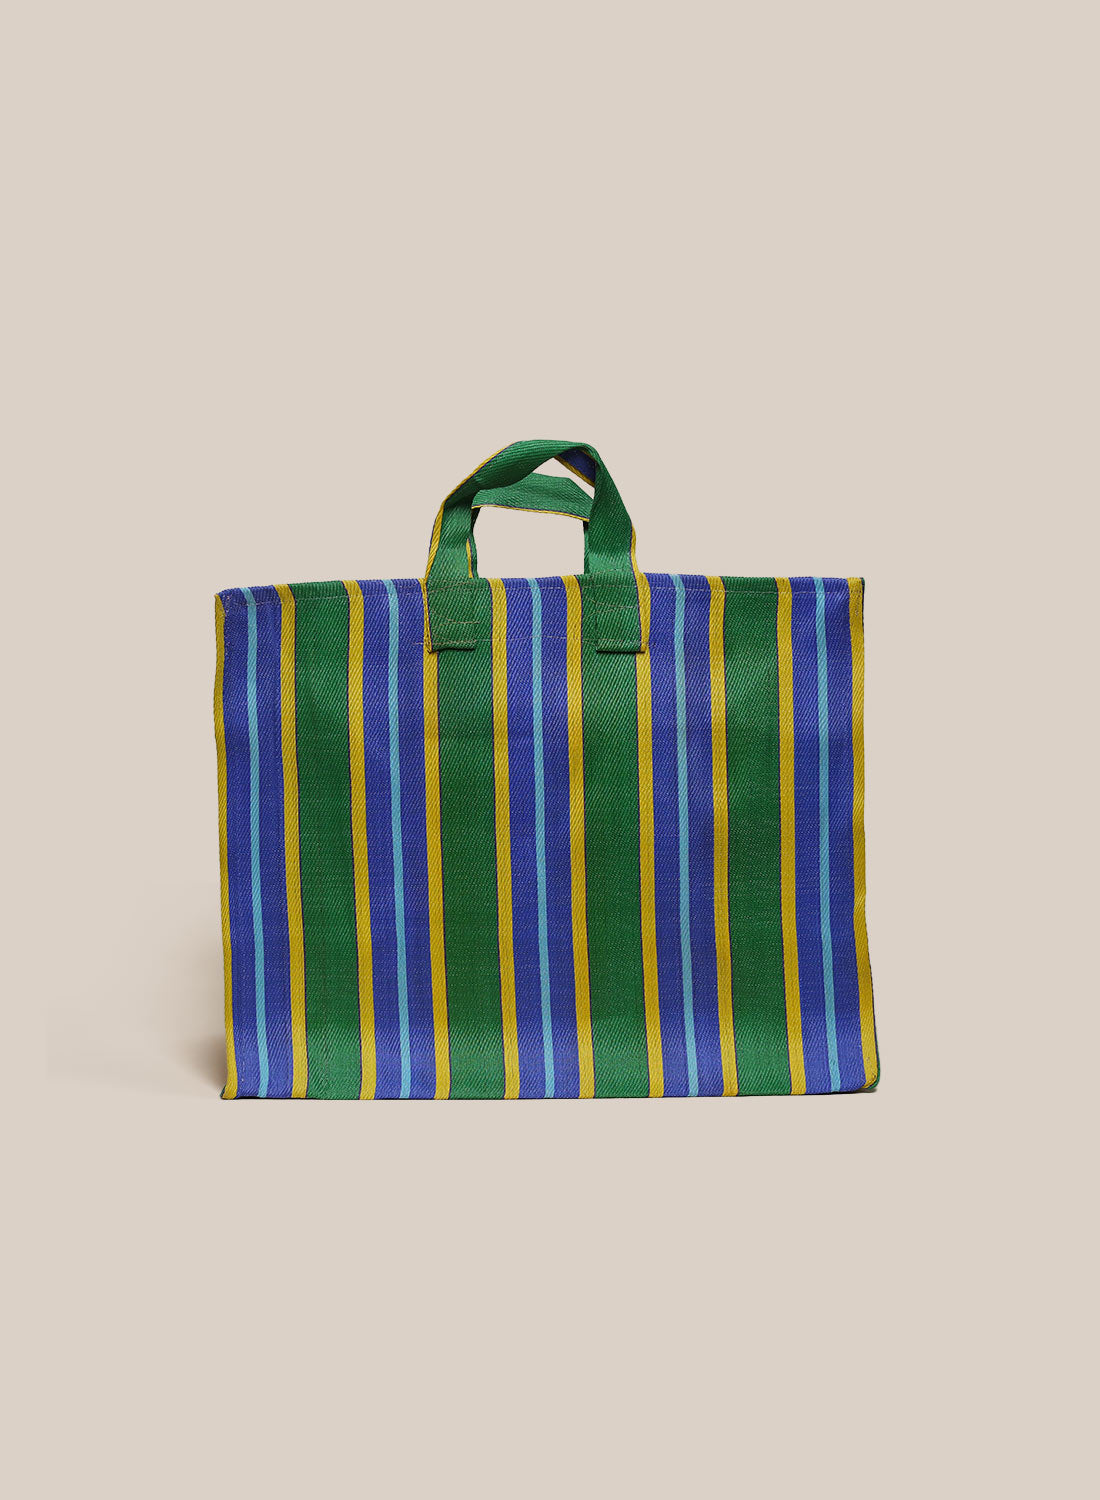 Day-to-Day Bag by Pan After - Large, Blue/Green